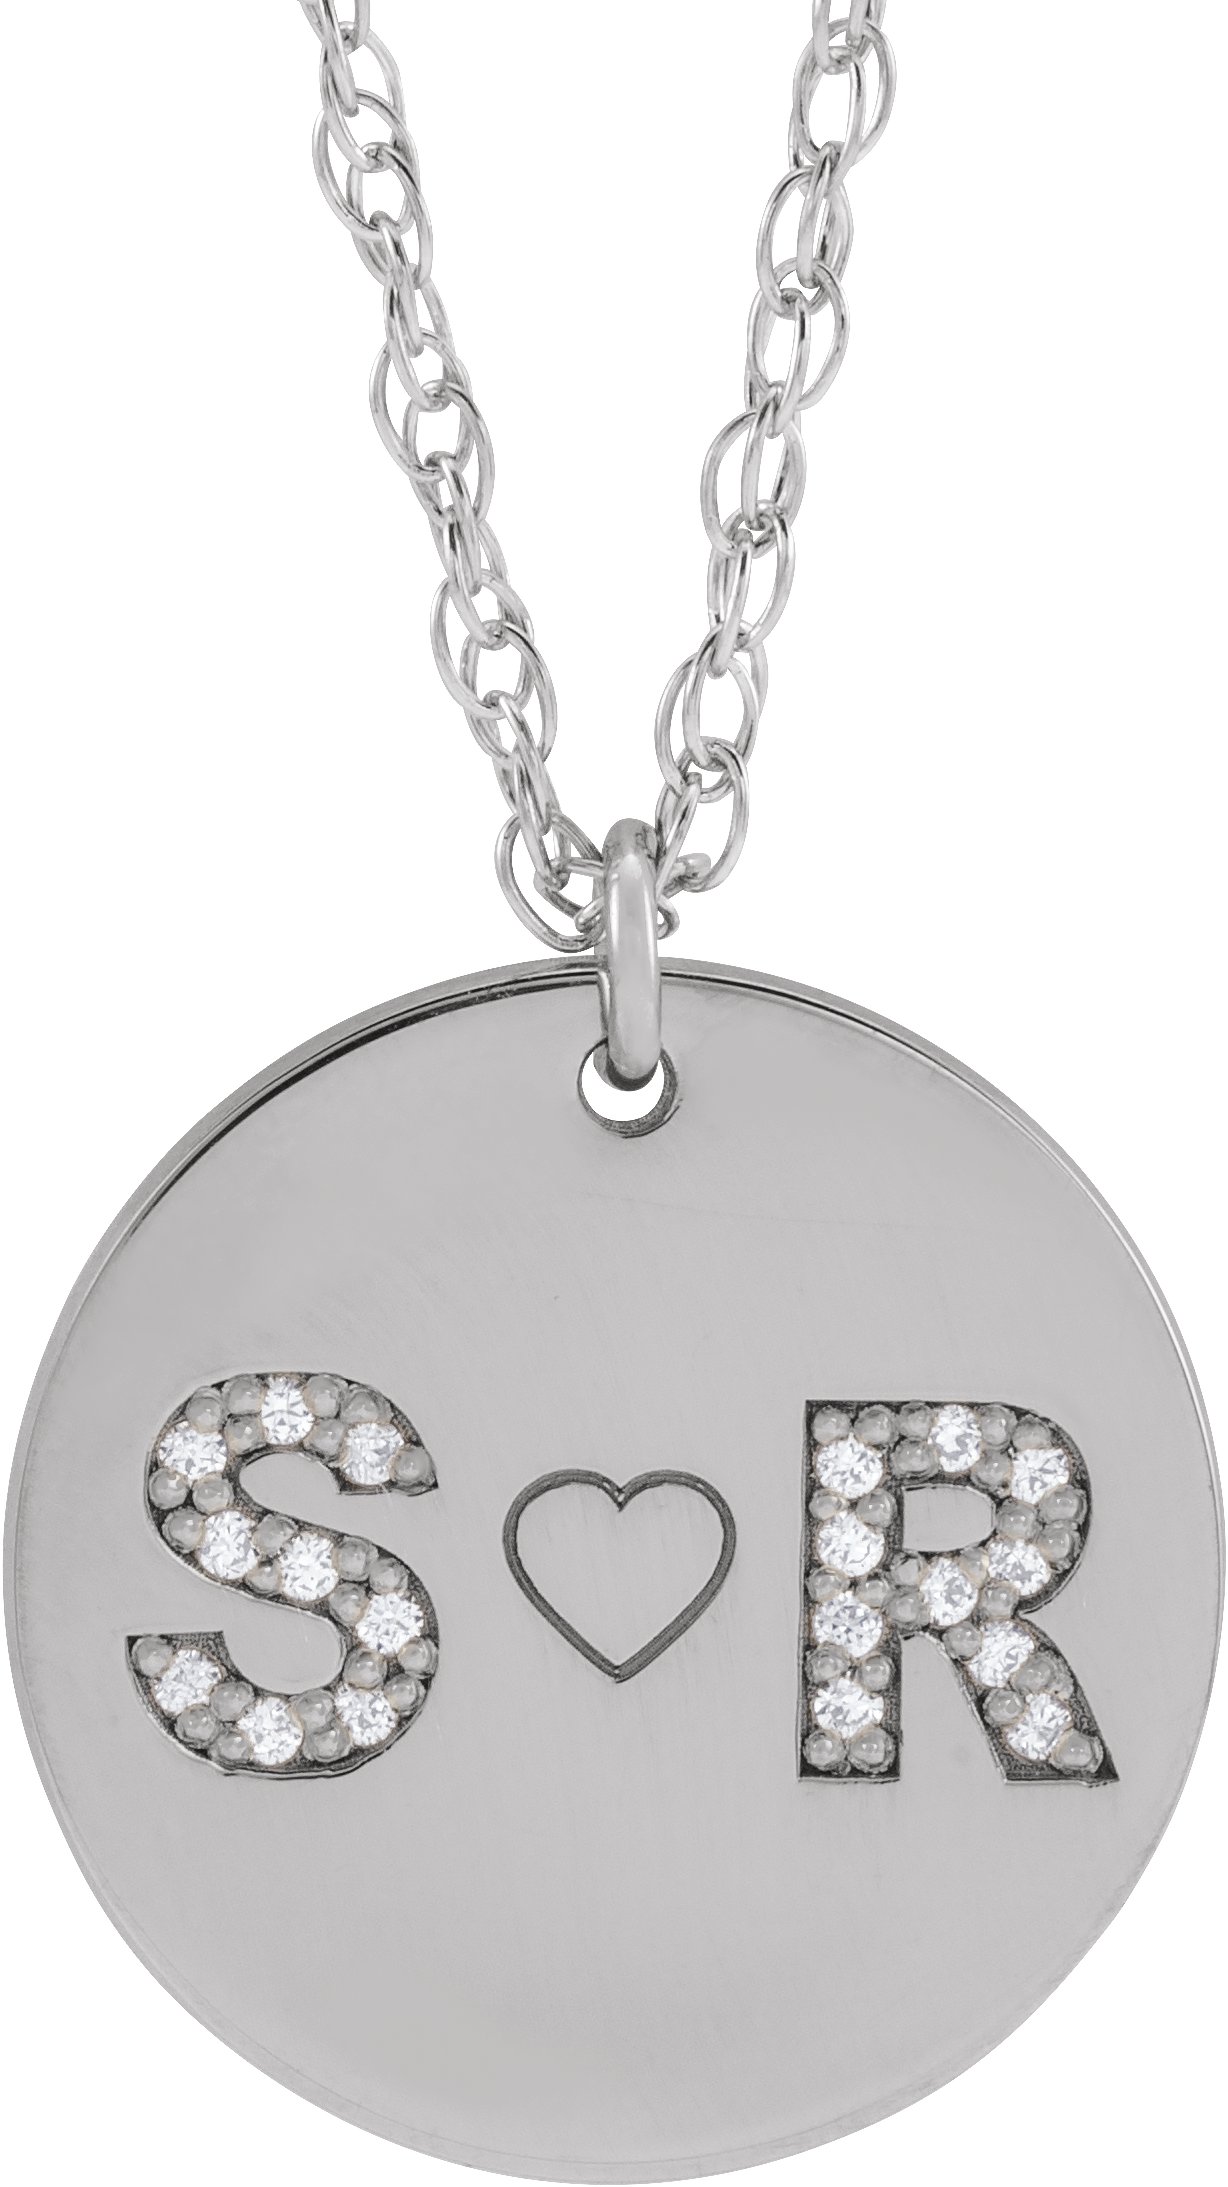 Personalized Couples Initial Necklace